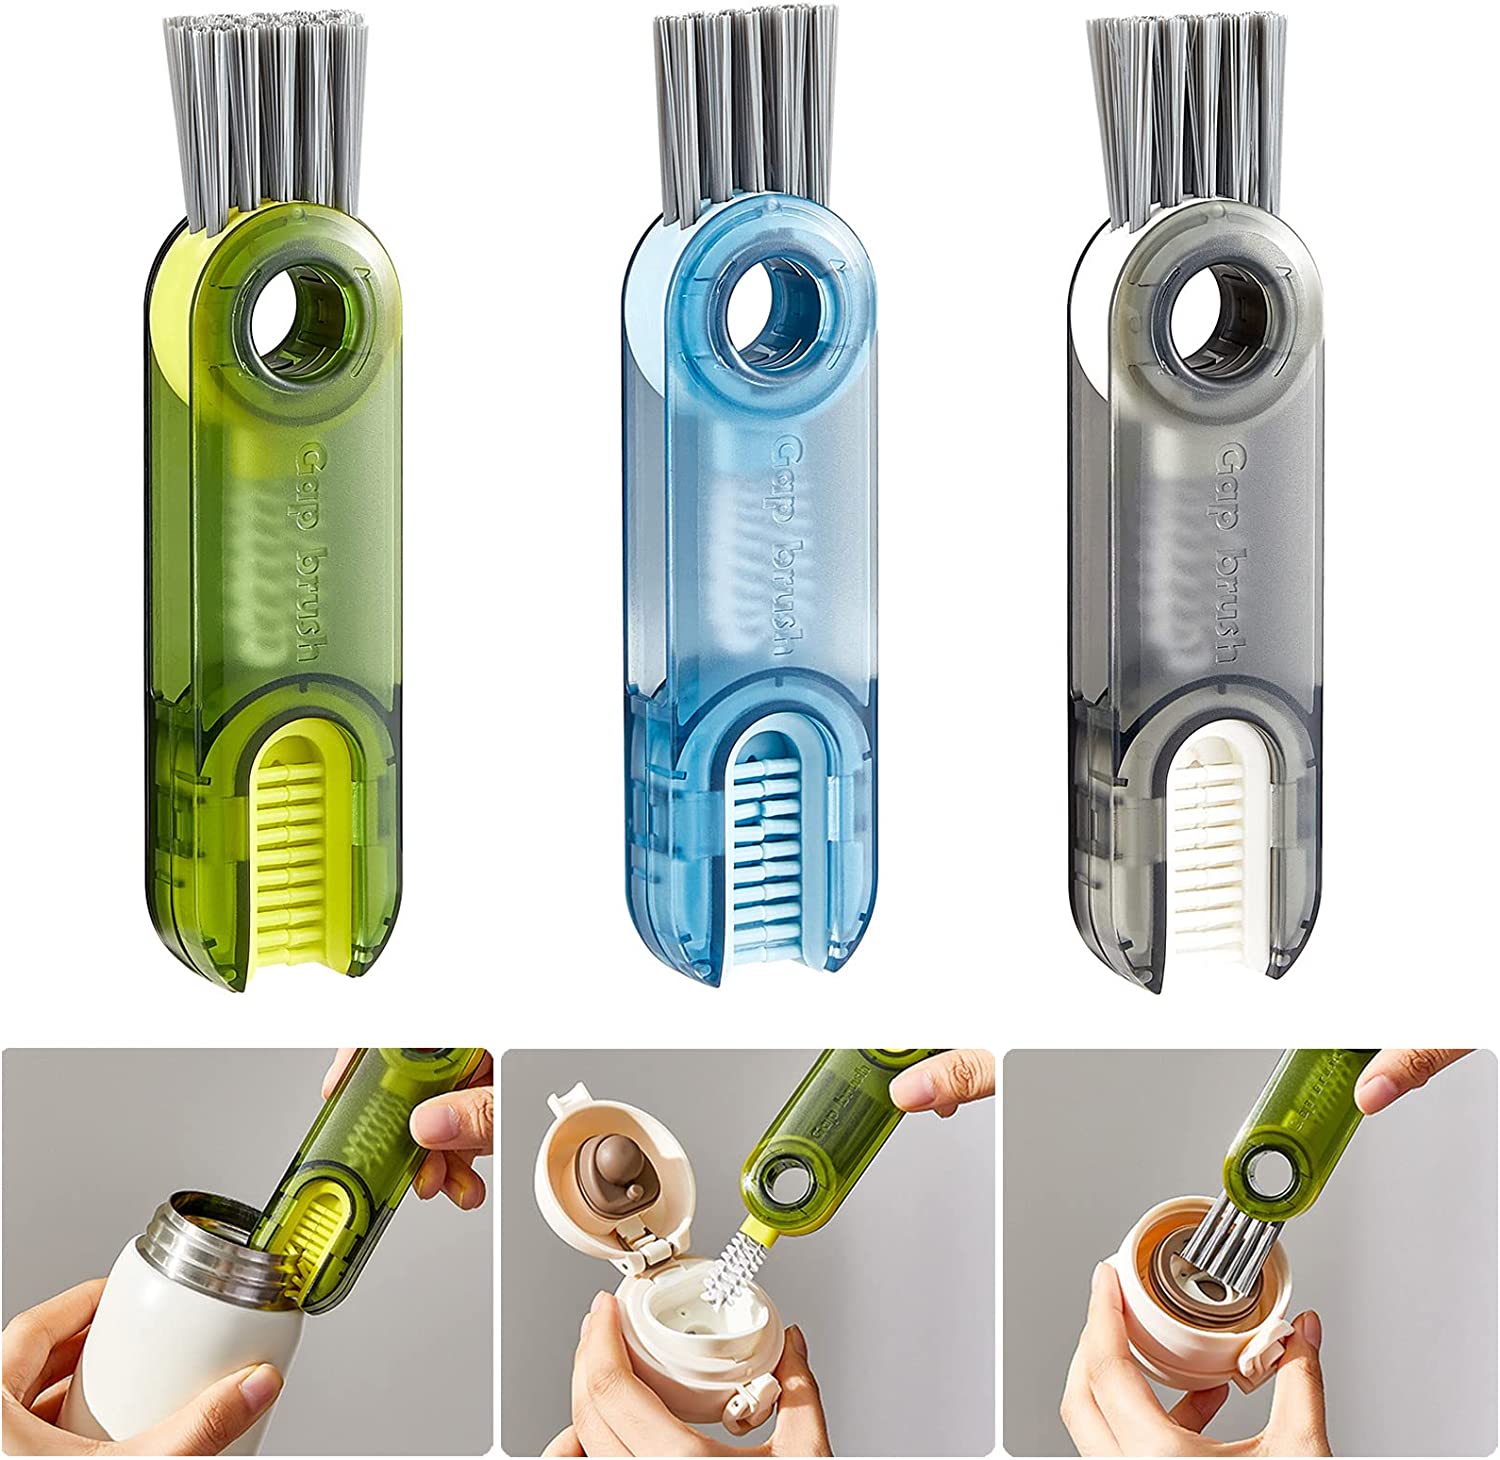 3-in-1 cup lid gap cleaning brush-3 in 1 Cup Lid Gap Cleaning